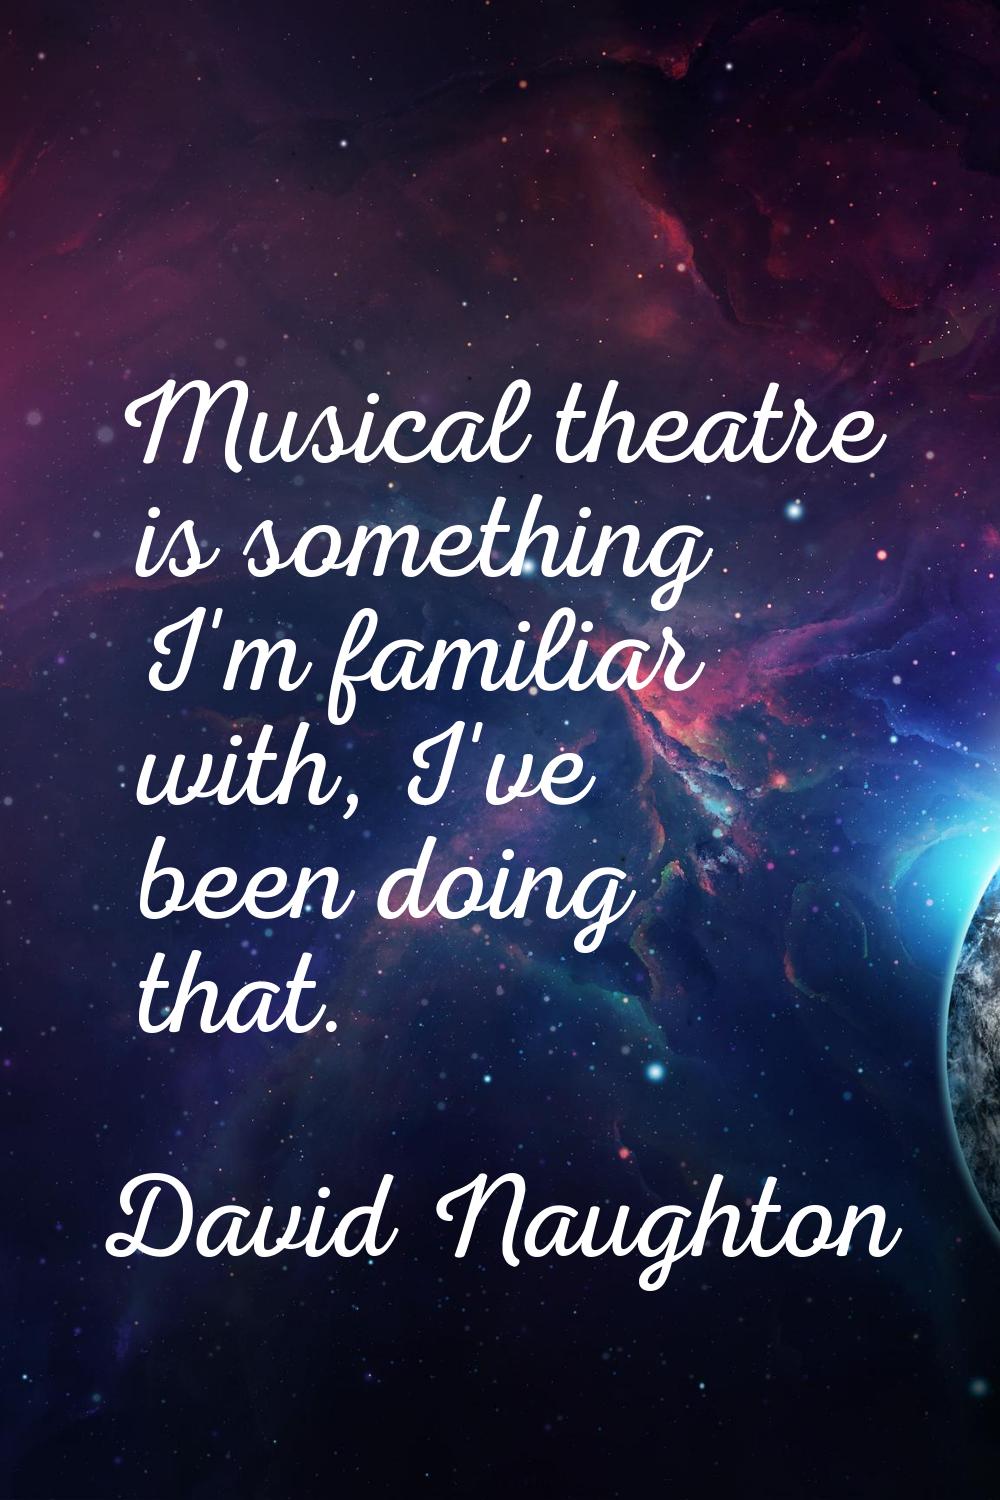 Musical theatre is something I'm familiar with, I've been doing that.